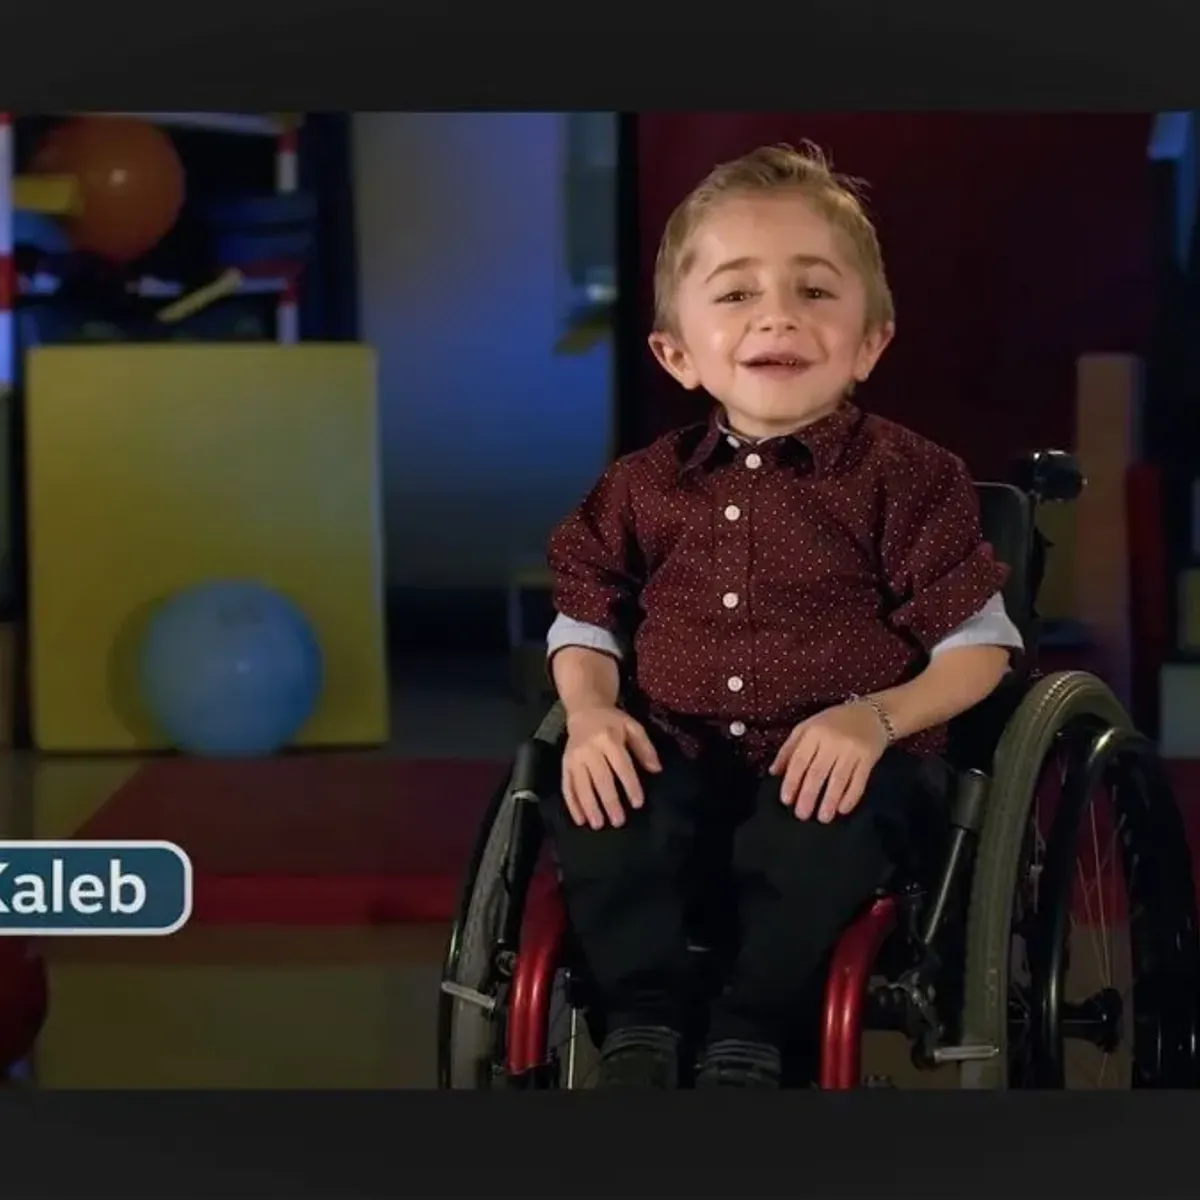 Kaleb from Shriners